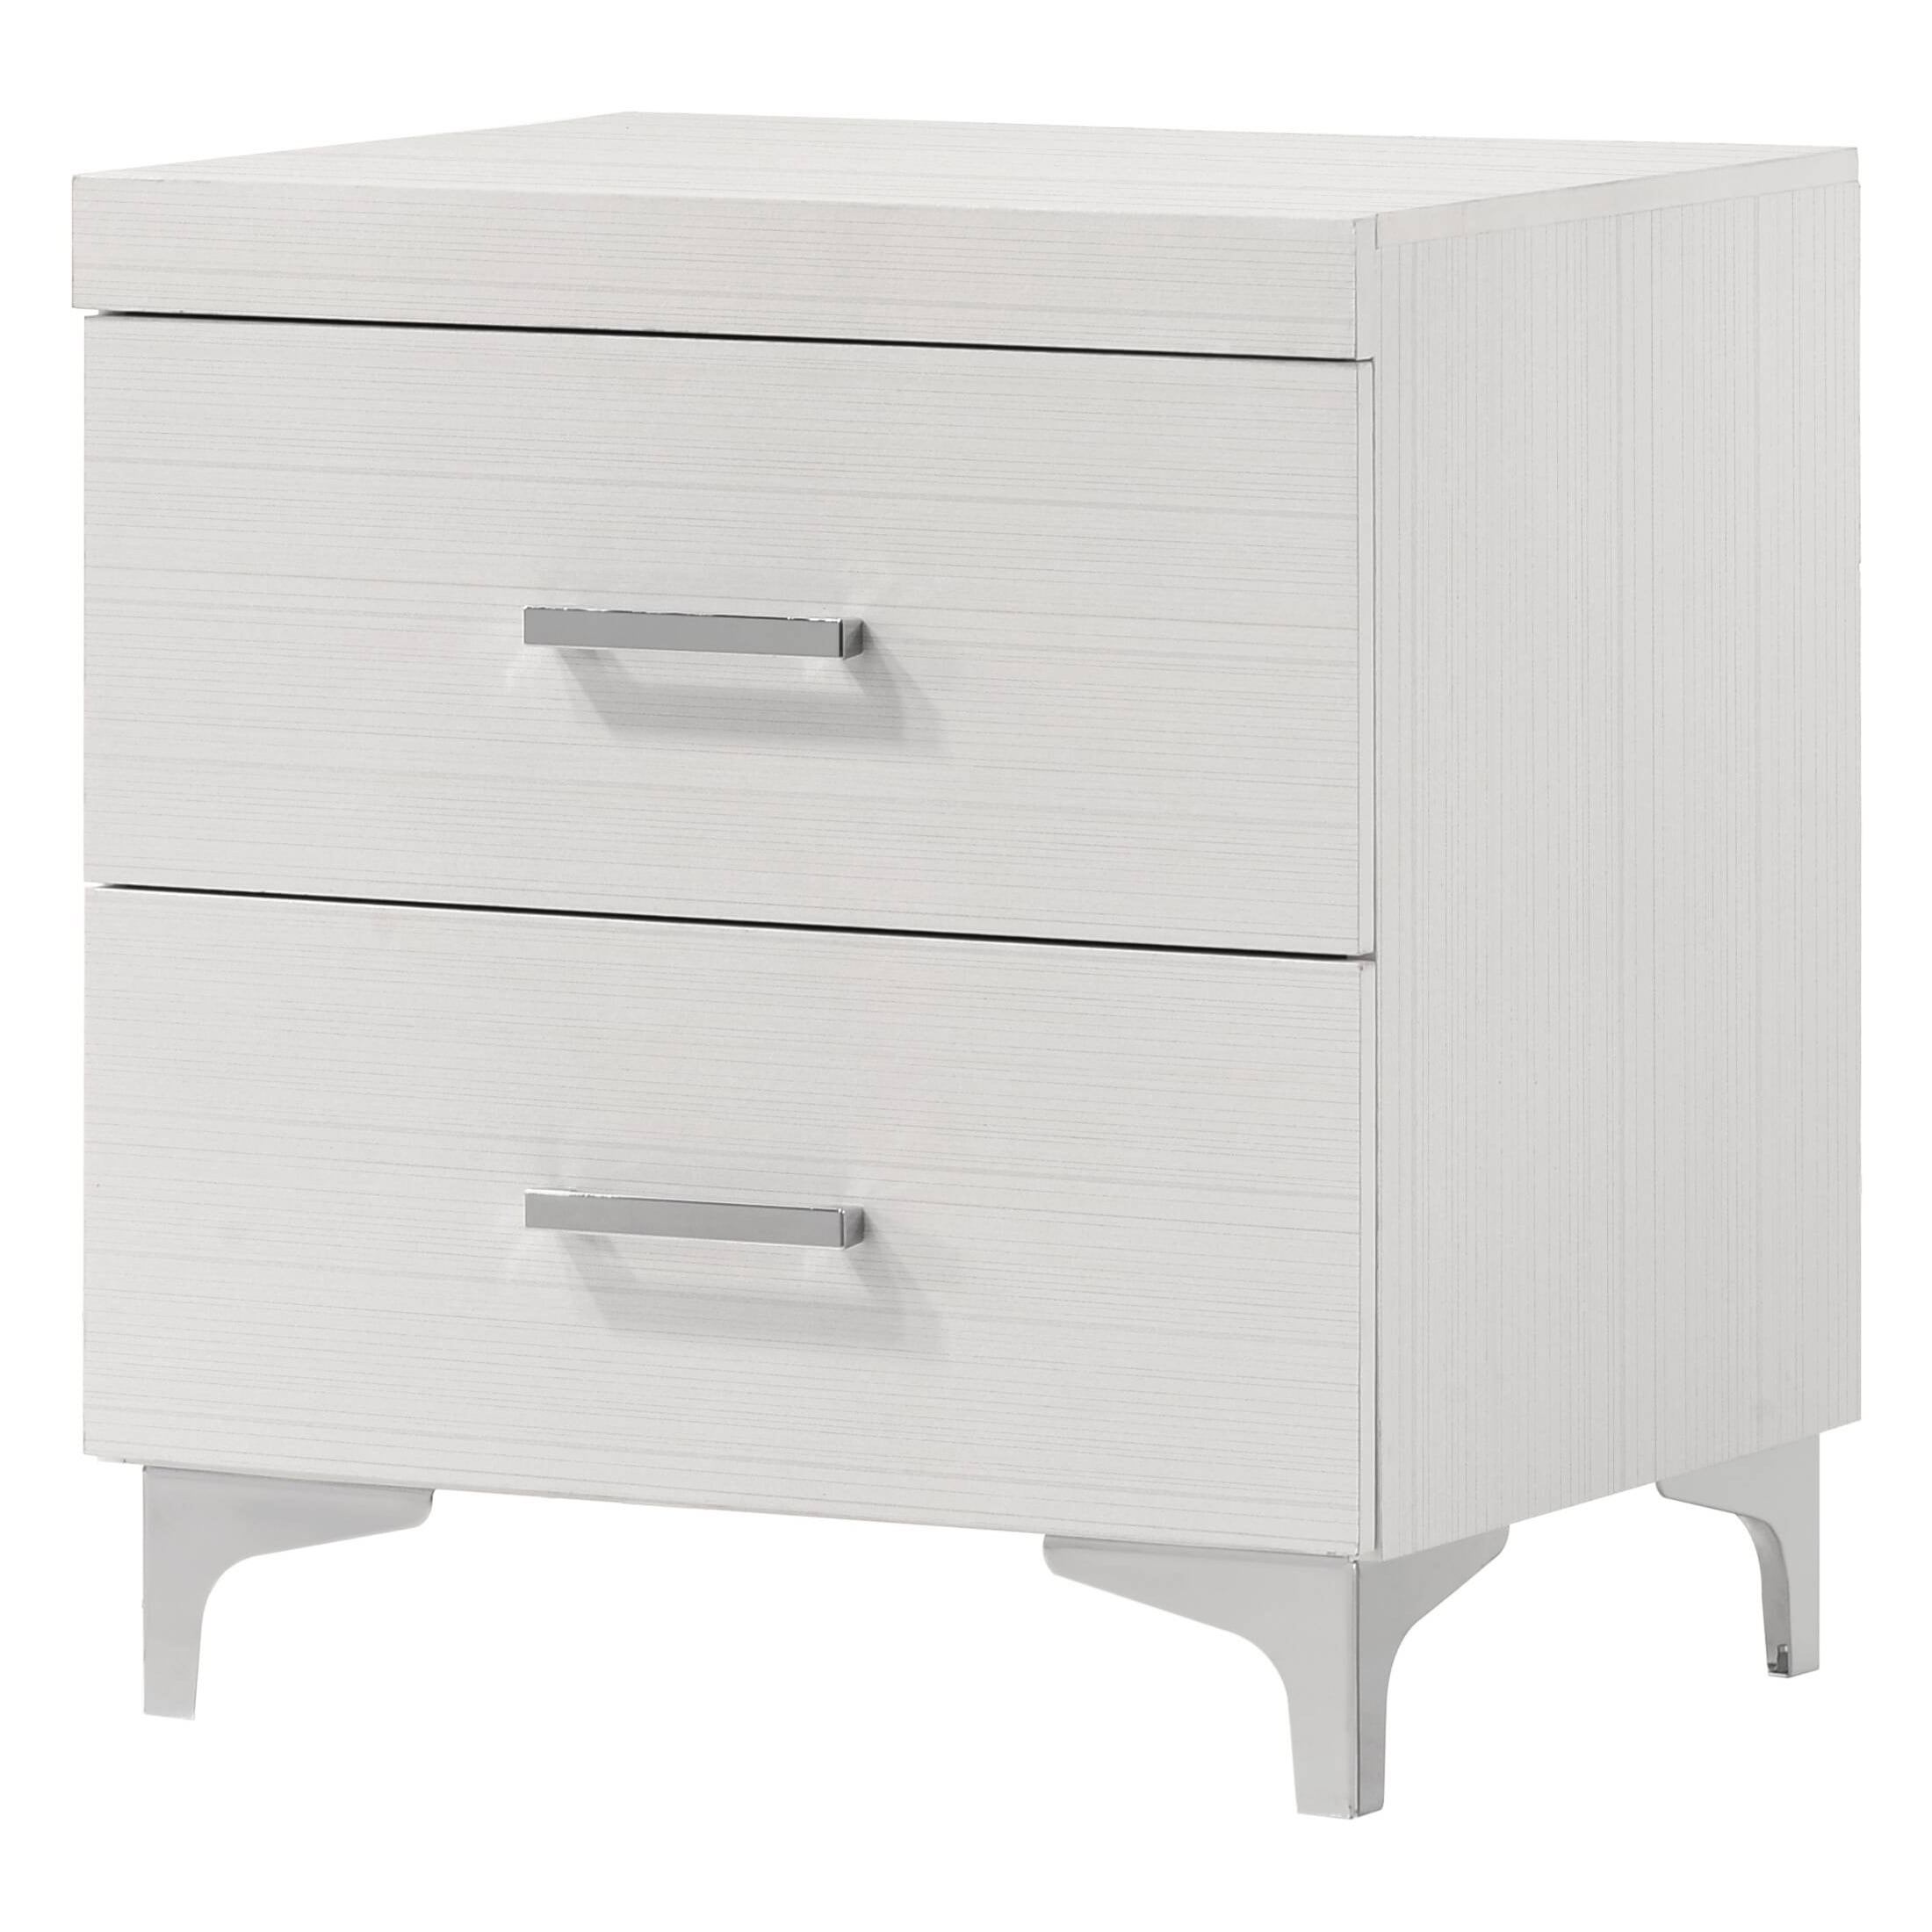 Picture of Acme Furniture BD00645 22 x 16 x 23 in. Casilda Nightstand, White